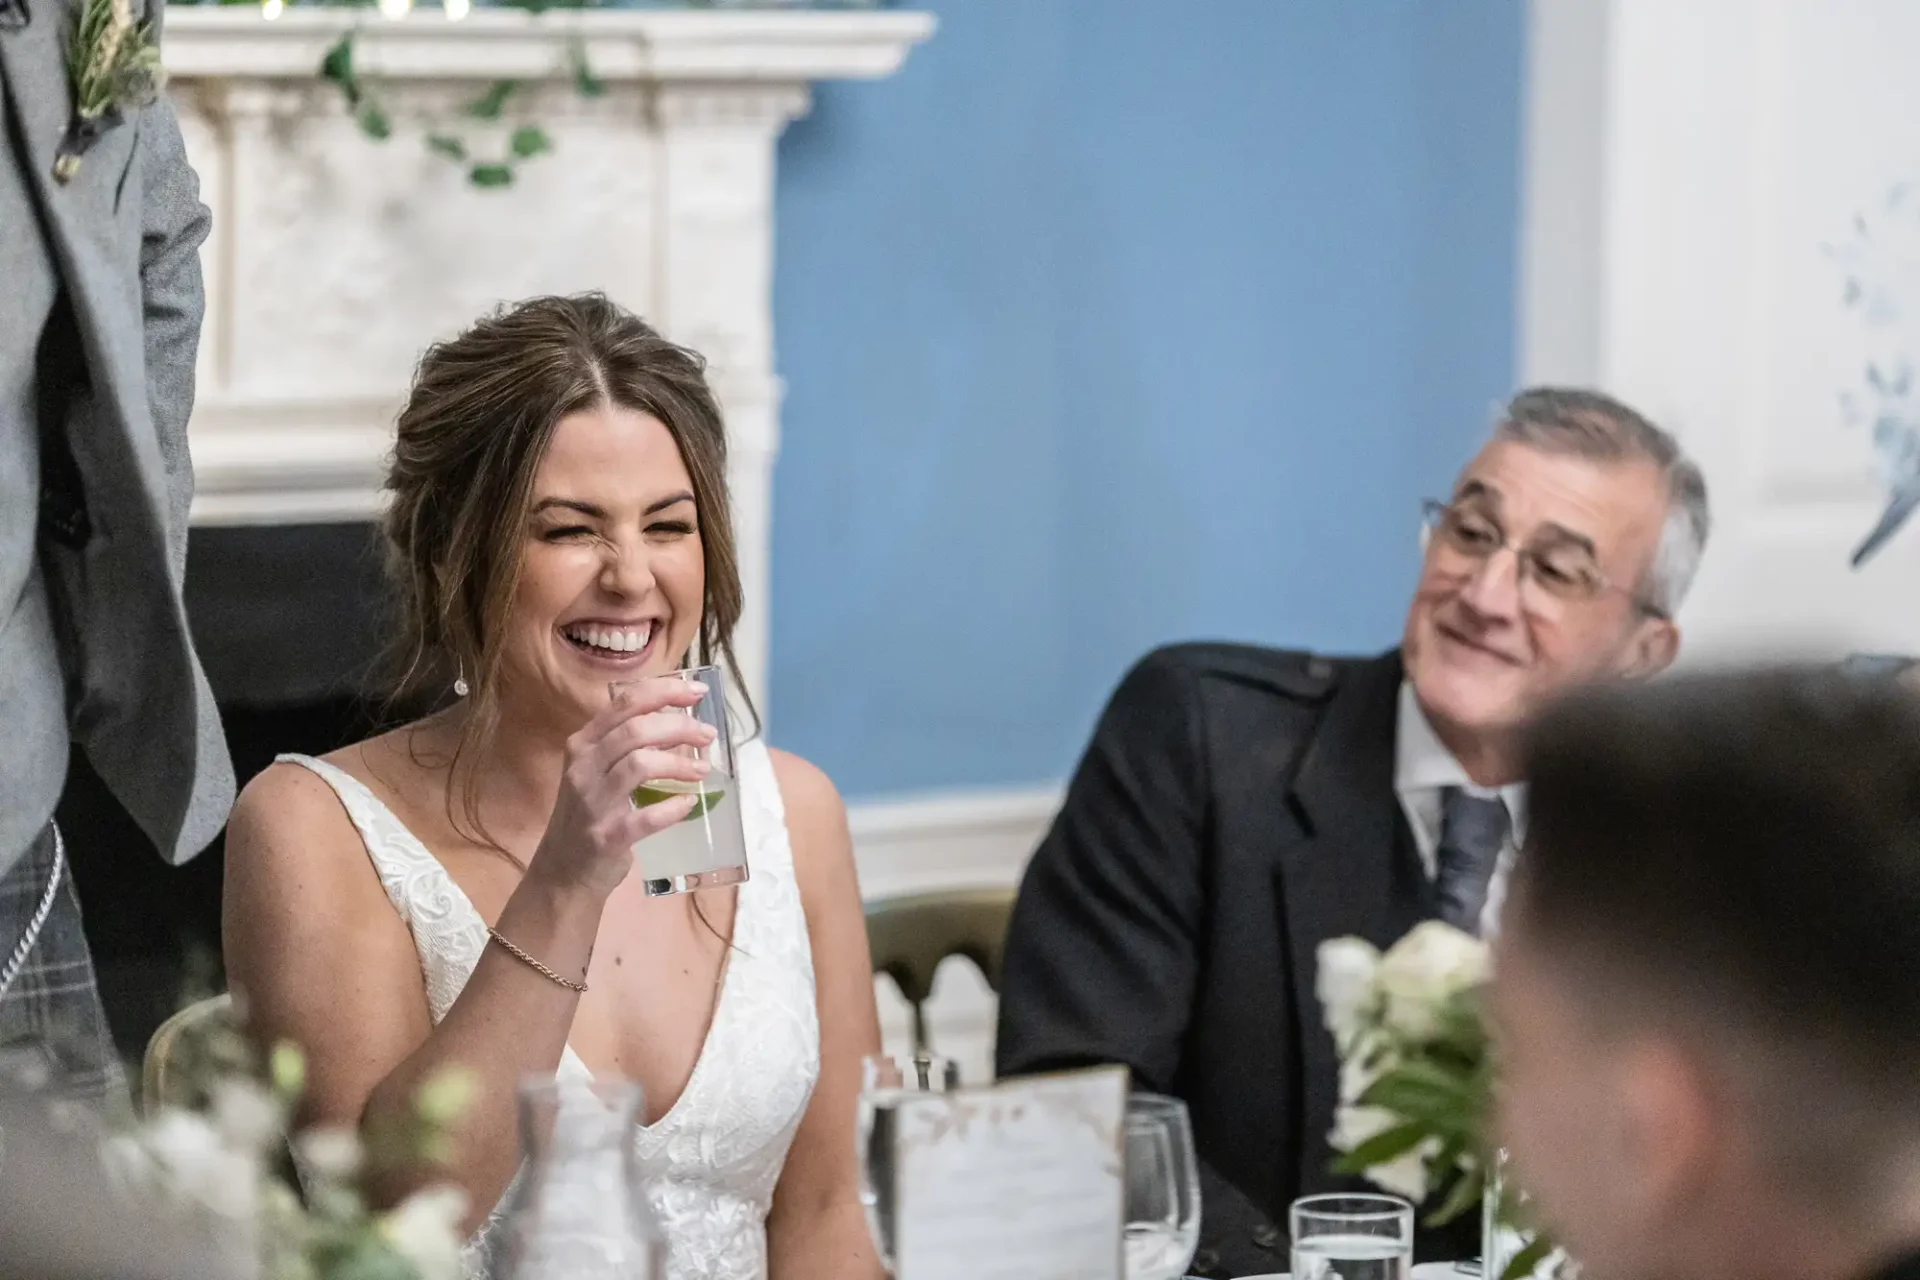 A bride laughing joyfully with a glass in hand at a wedding reception table, a man smiling at her in the background.